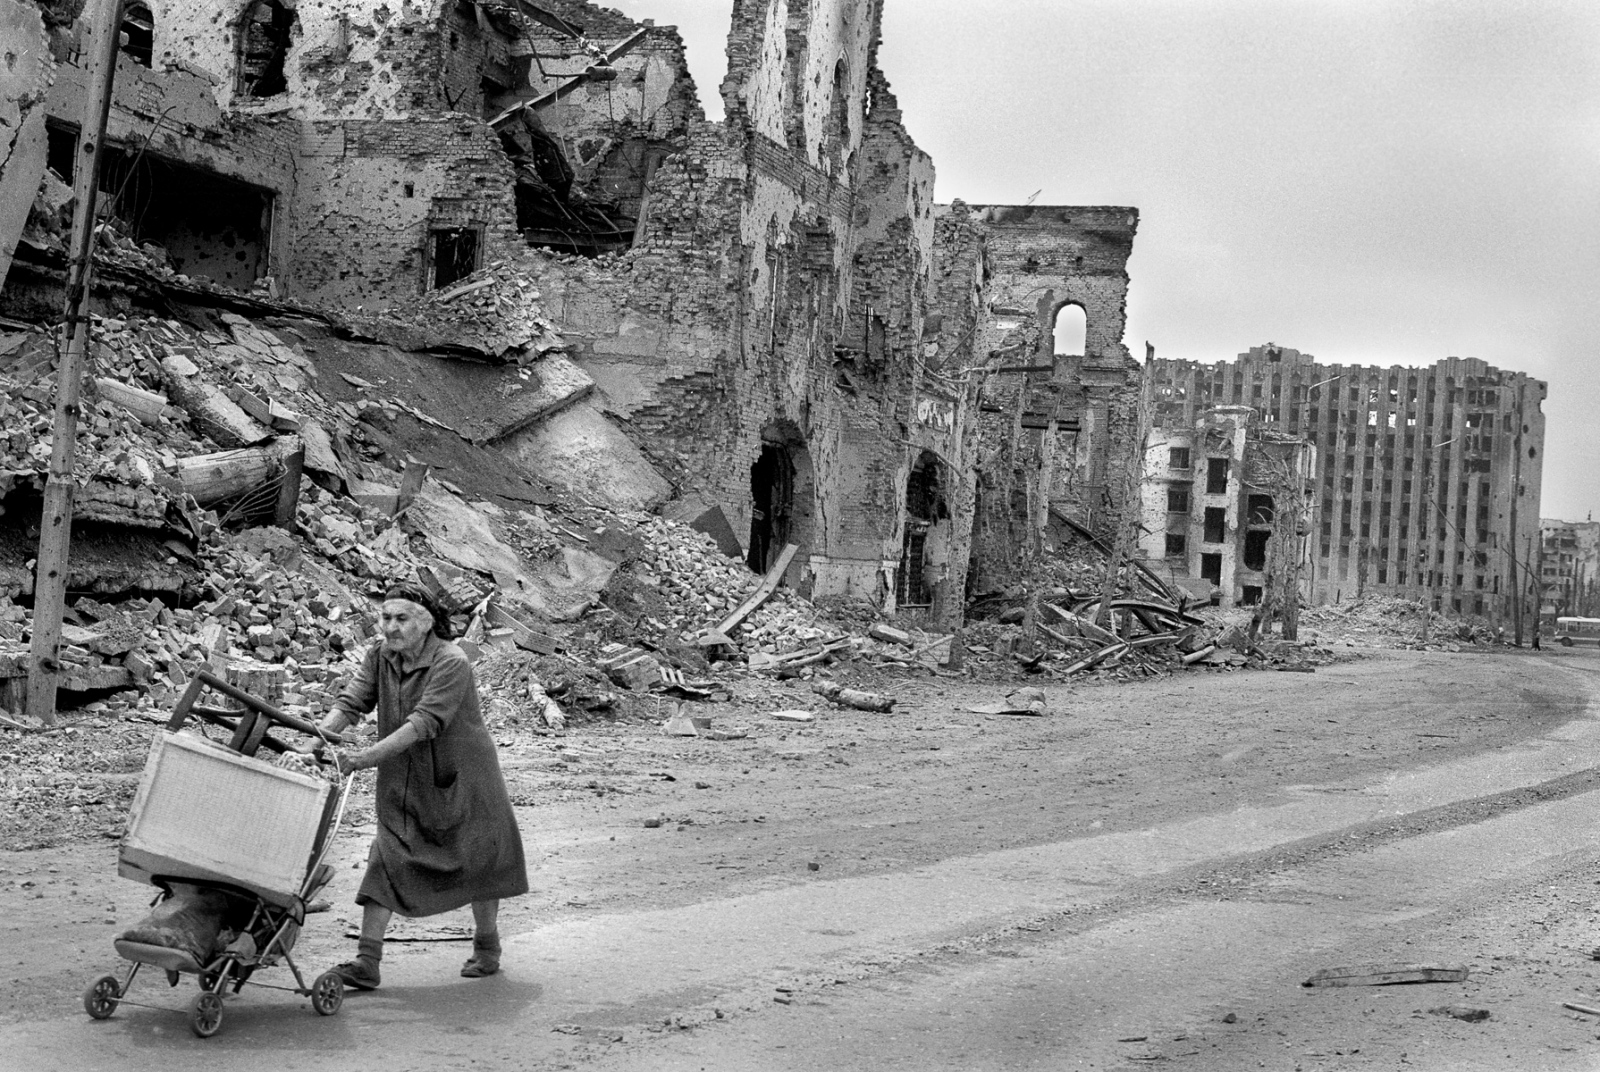 Forgotten Wars - An elderly woman takes her belongings to find a new place...